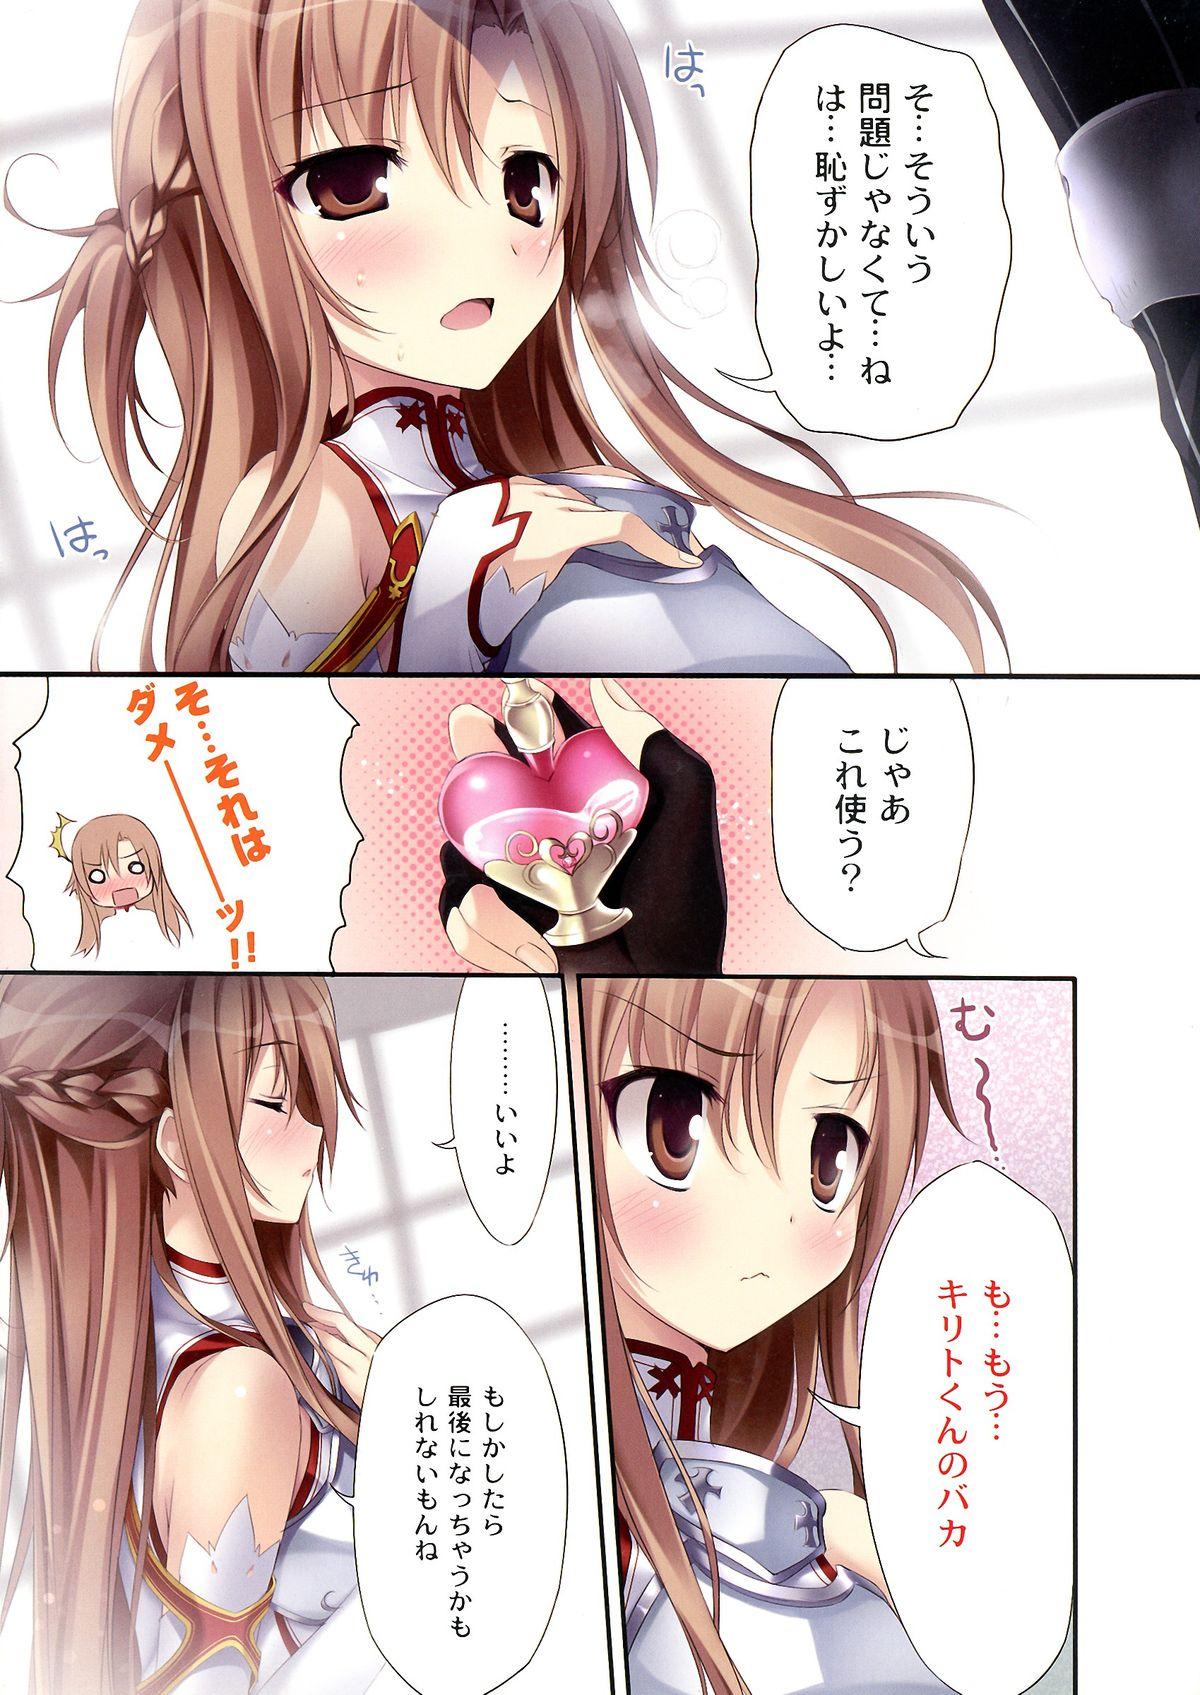 Baile KARORFUL MIX EX9 - Sword art online Toes - Page 4